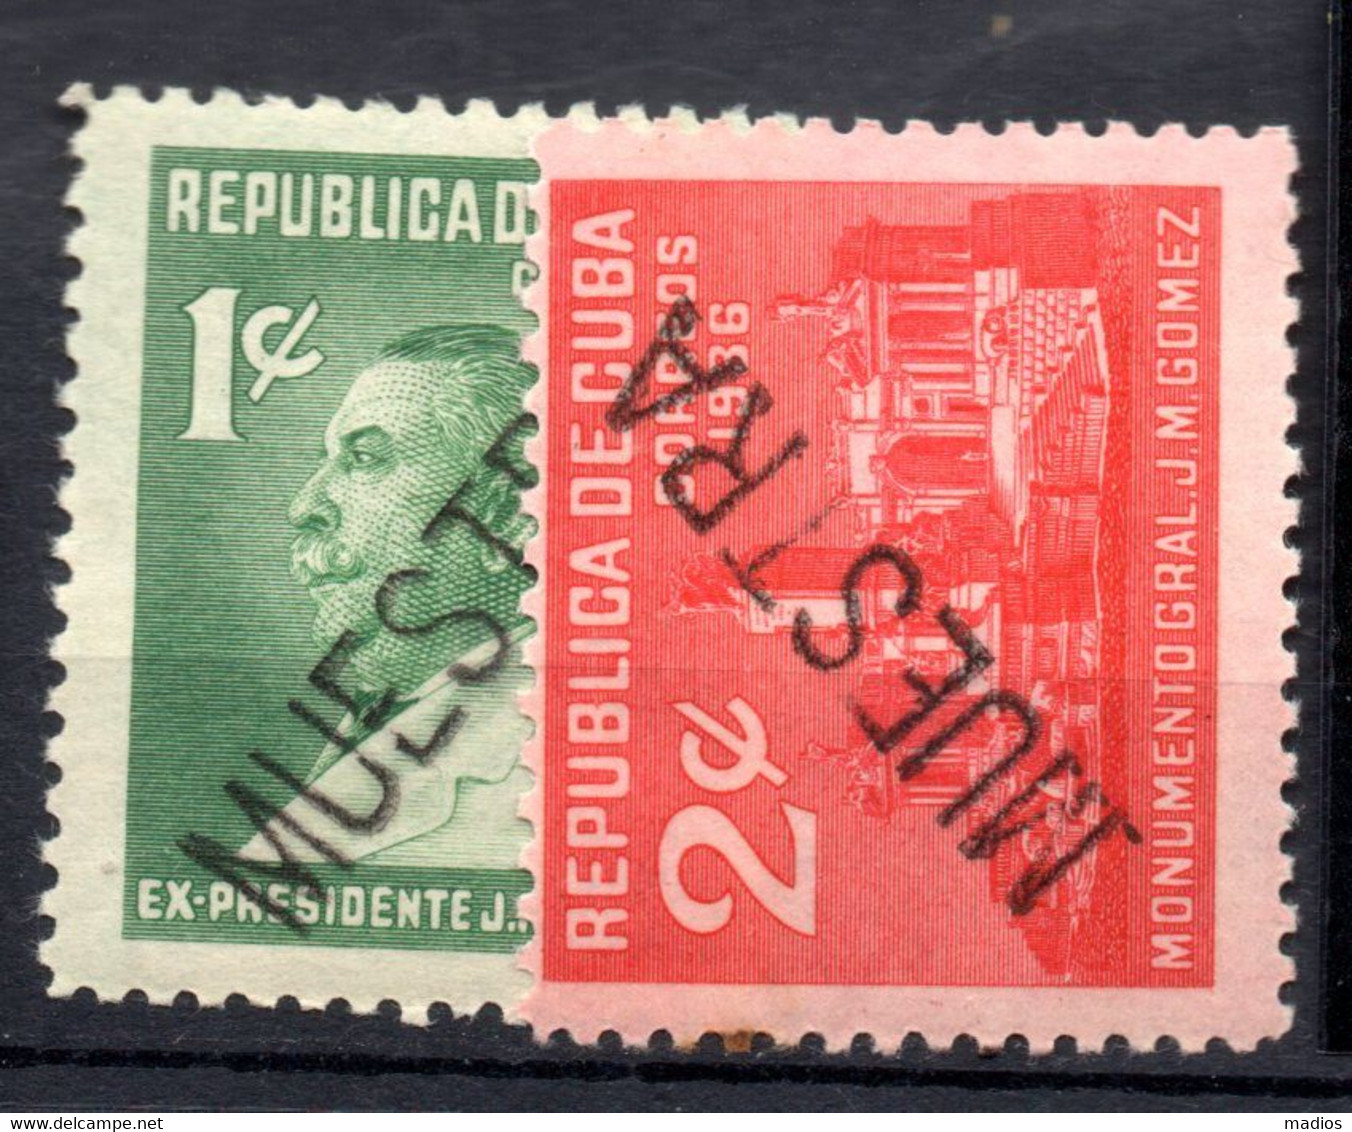 39578 CUBA  1936 Gral Jose M Gomez Ovpt. *MUESTRA" In Black/Mint - Imperforates, Proofs & Errors